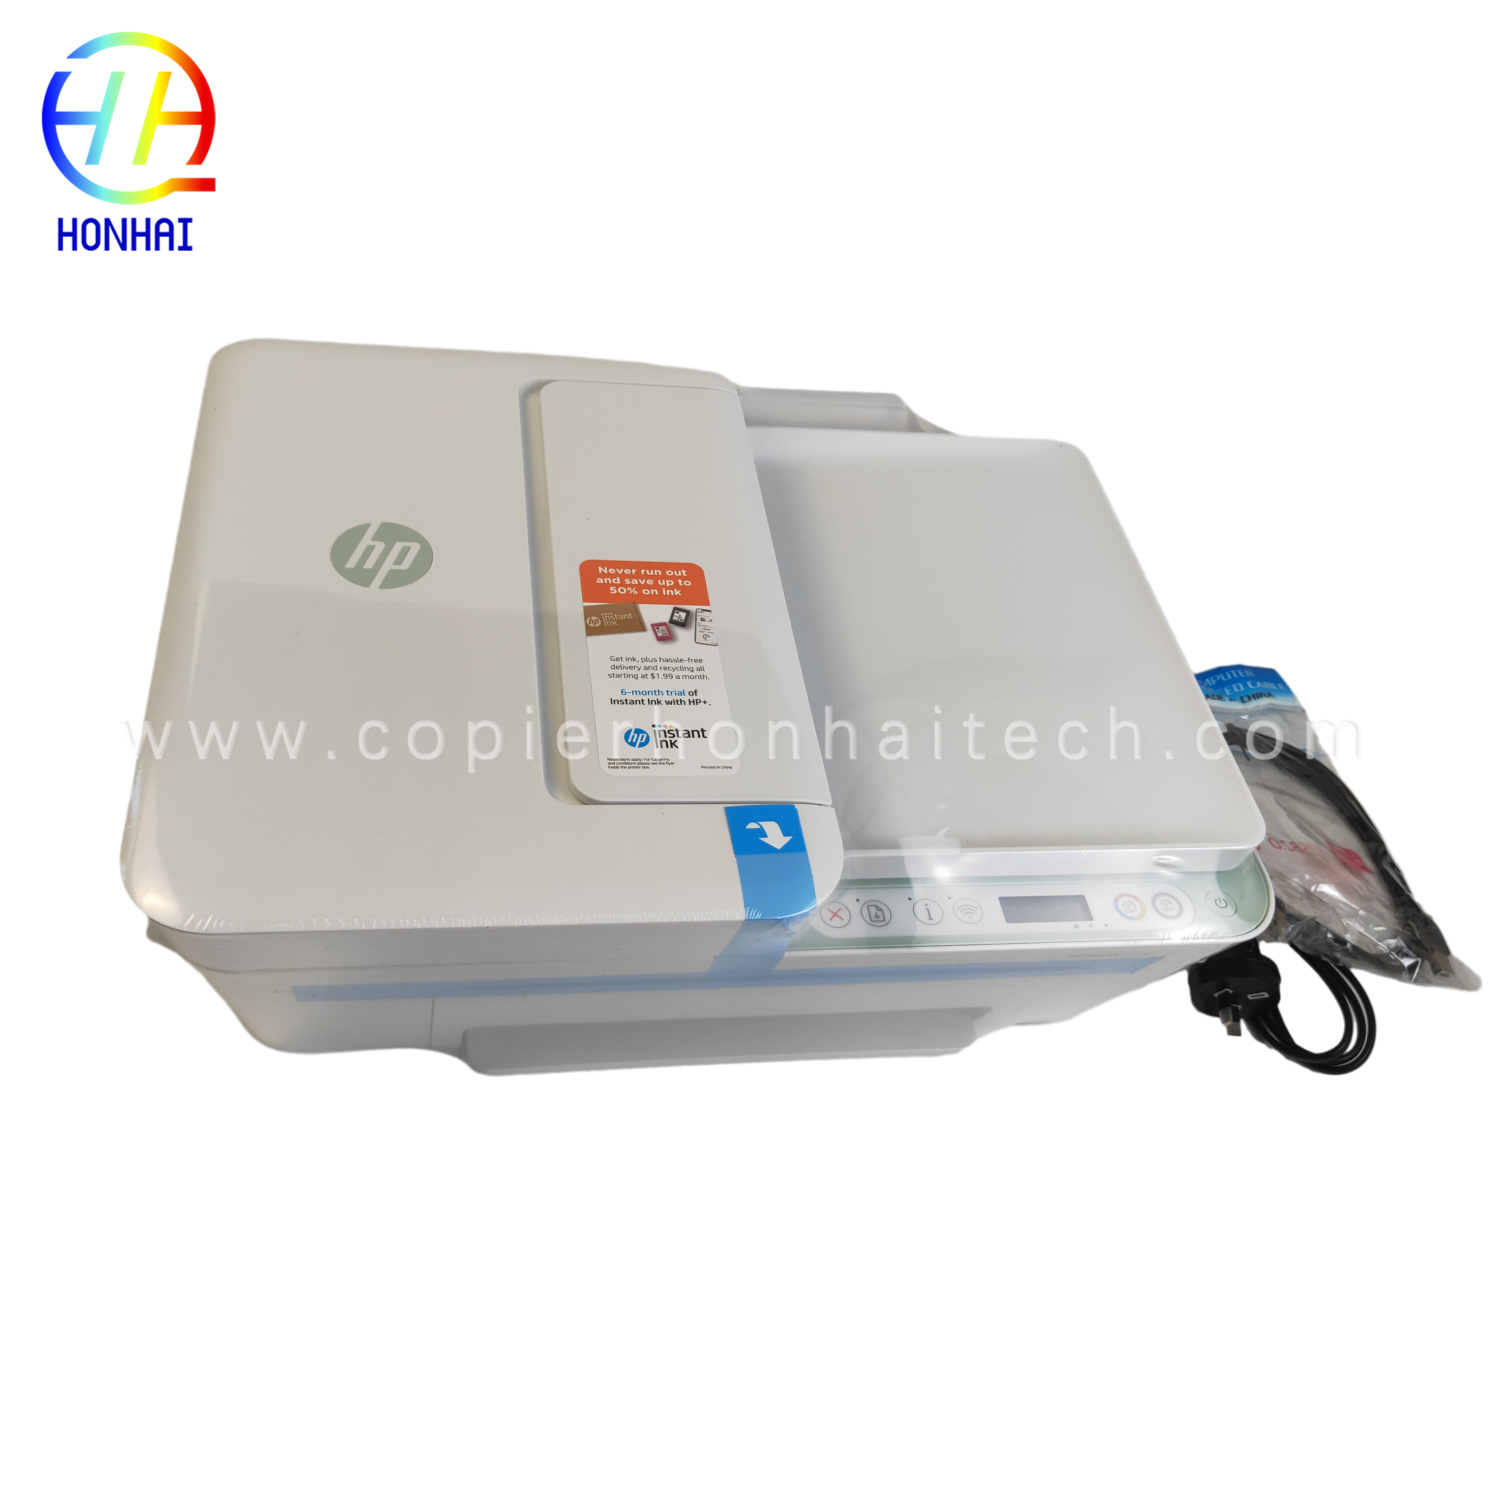 https://www.copierhonhaitech.com/original-new-wireless-printer-for-hp-deskjet-4122e-all-in-one-printer-scan-and-copy-home-office-students-and-home- umshicileli-26q96a-imveliso/